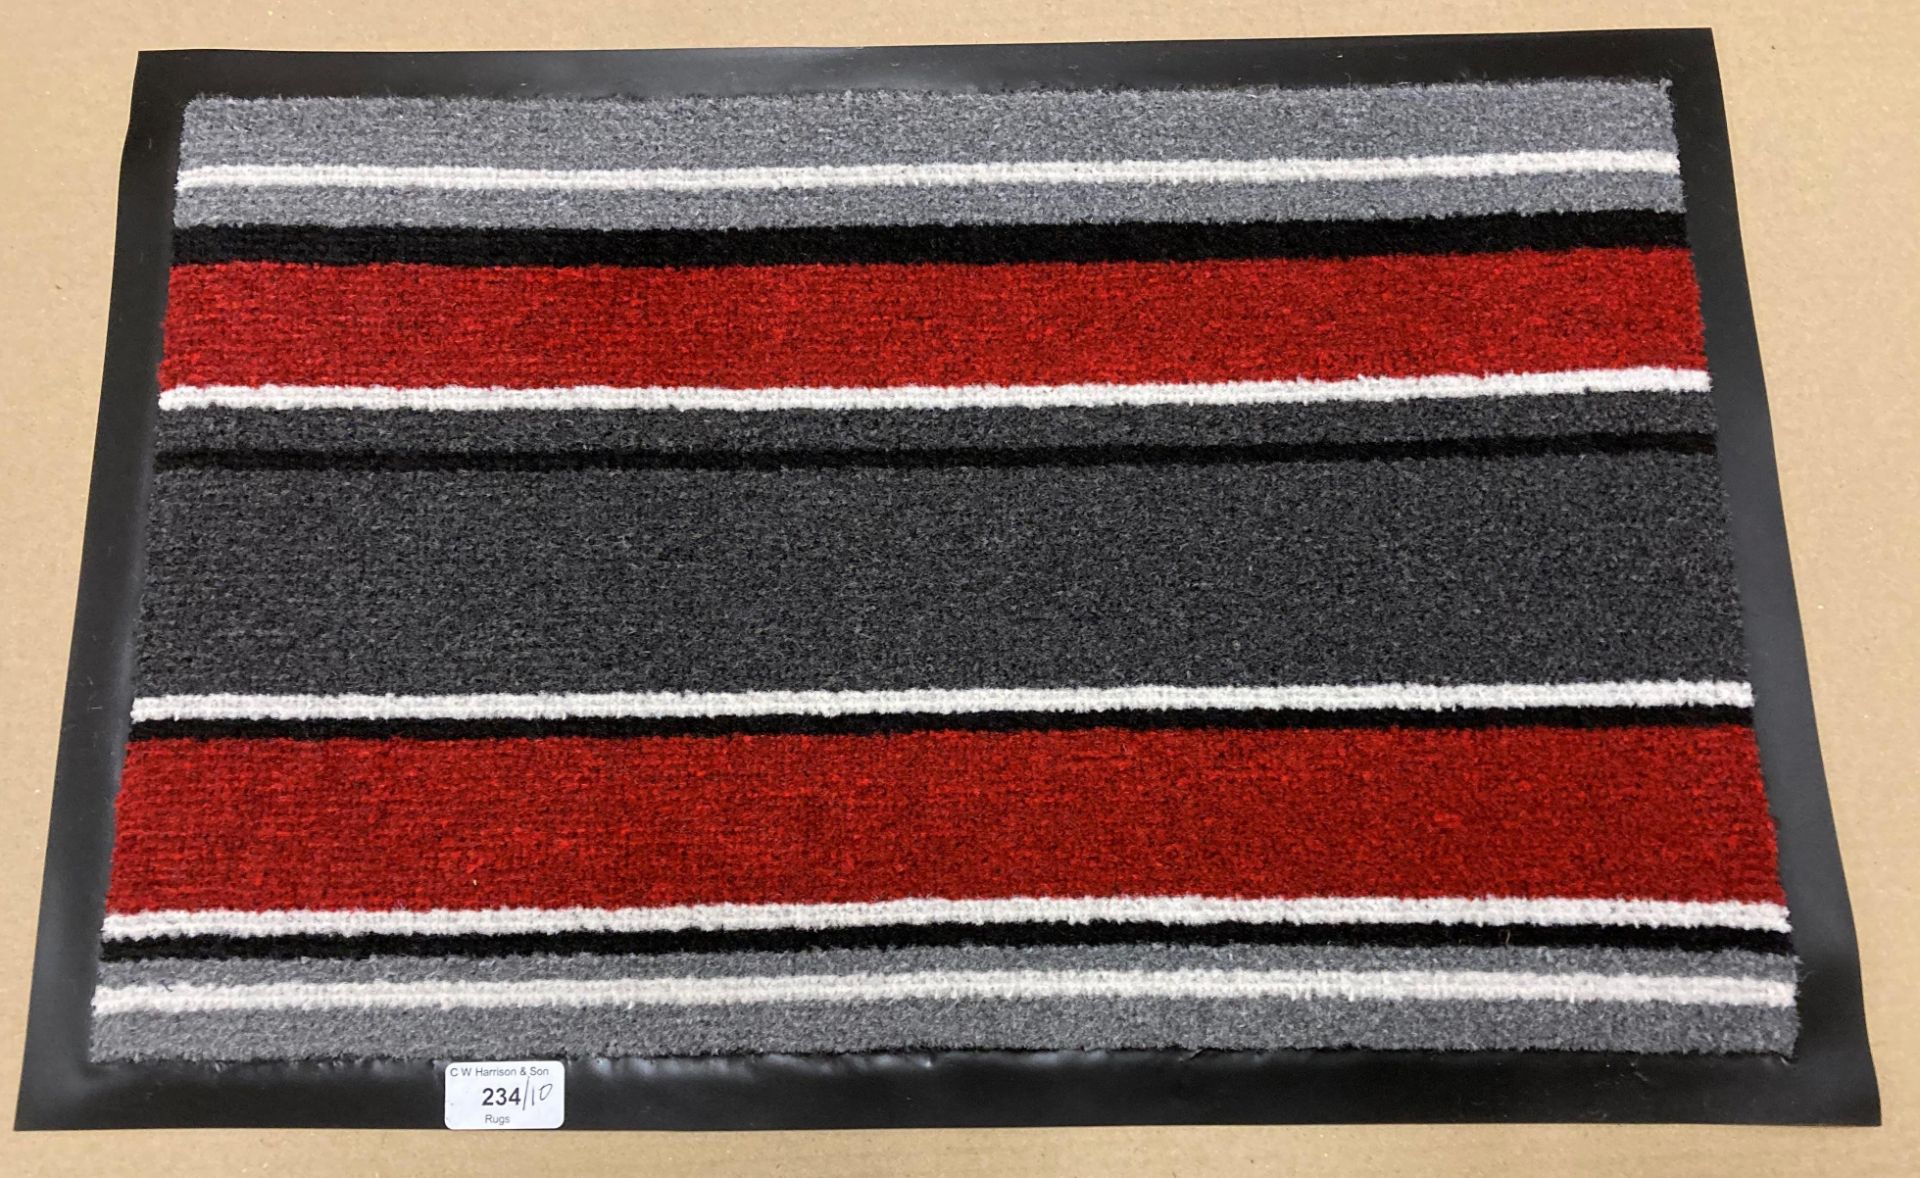 10 x Red/black/grey/white striped barrier mats 60cm x 40cm (H/J05) *Please note the final purchase